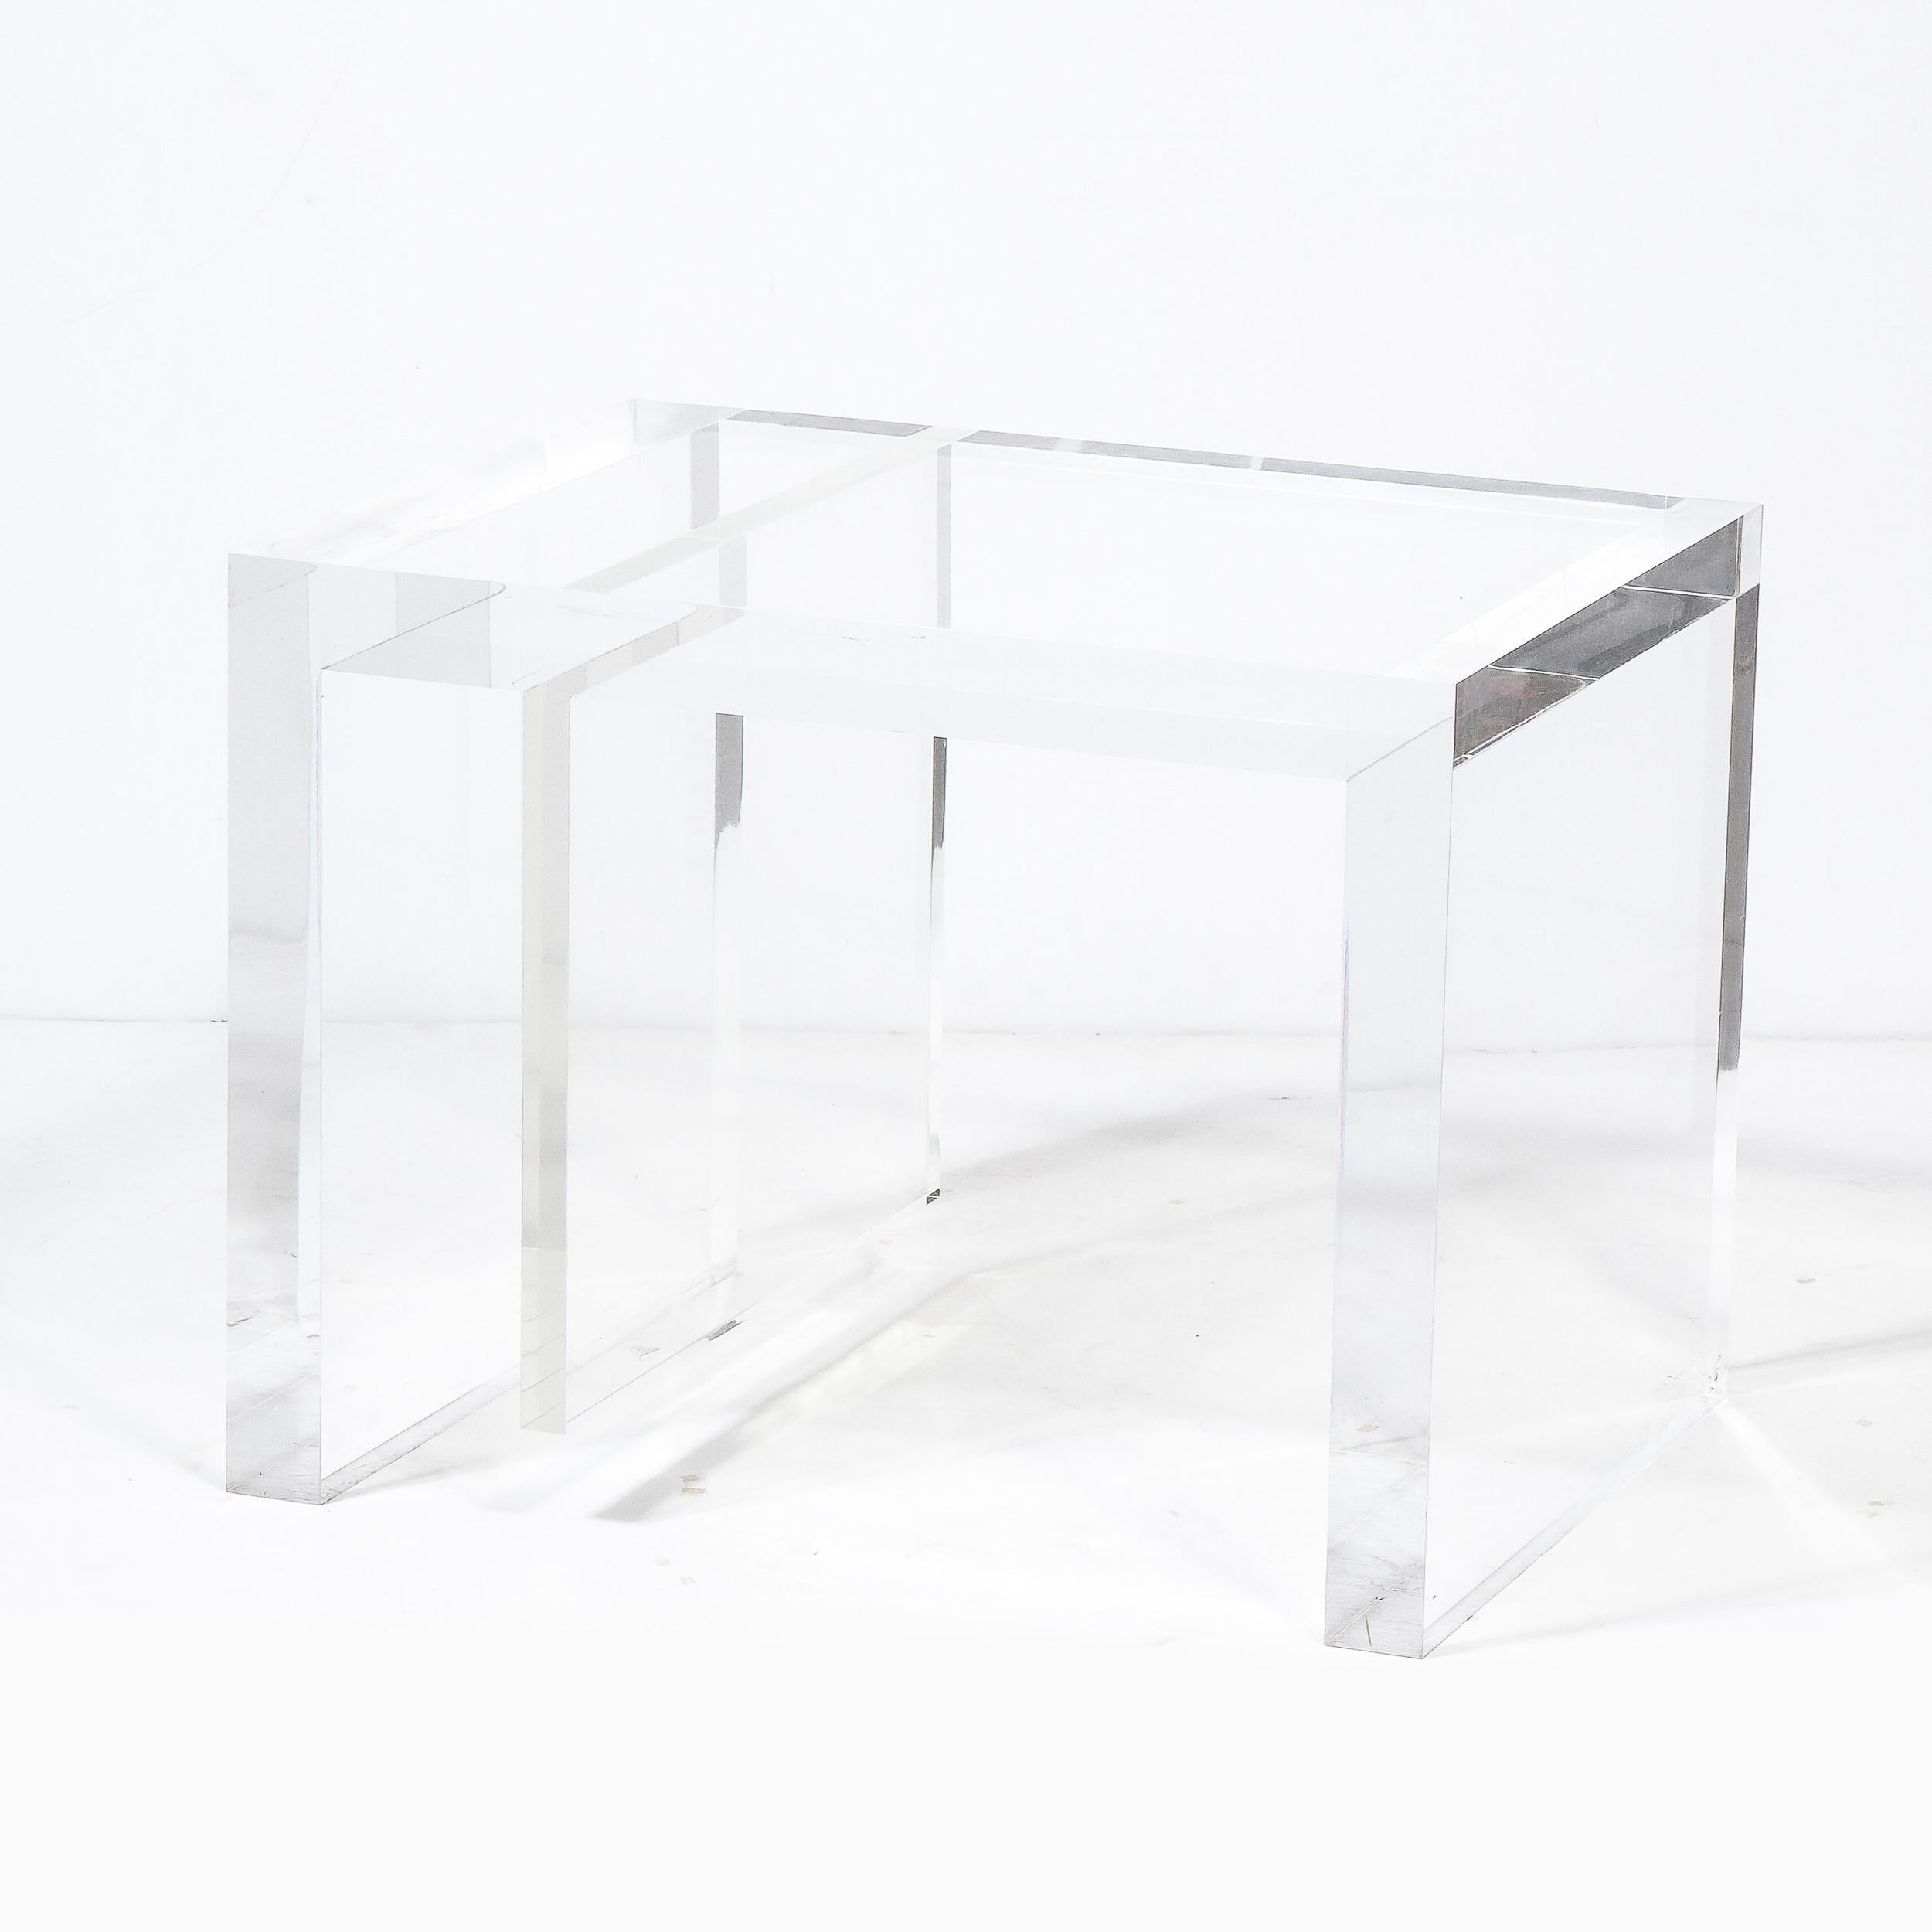 This sophisticated modernist side/ occasional table was realized in the United States during the latter half of the 20th century. It features a rectilinear and graphic body composed of beautiful translucent lucite. With its dynamic geometry and